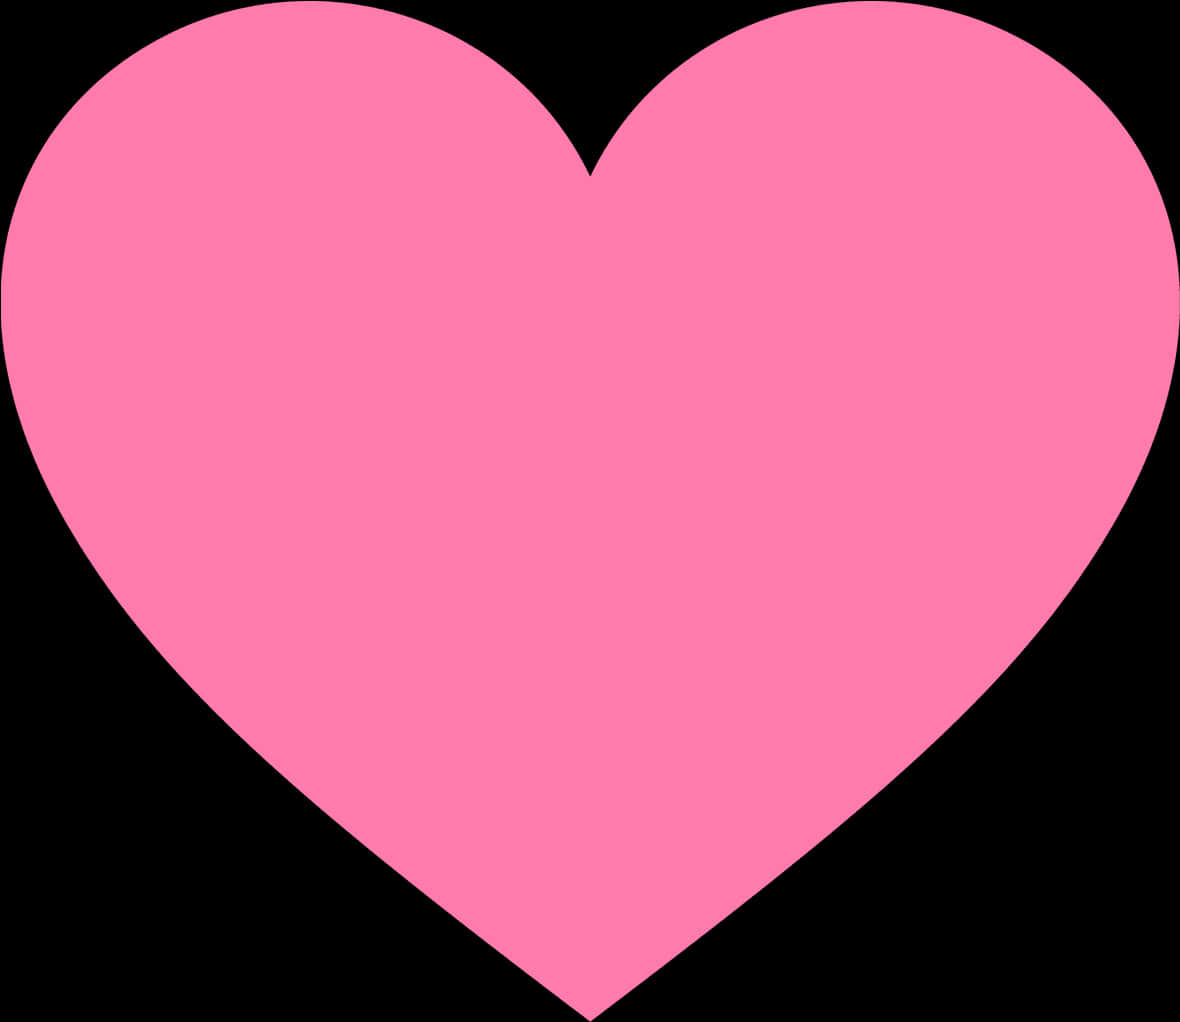 Pink Heart Shape Graphic PNG image